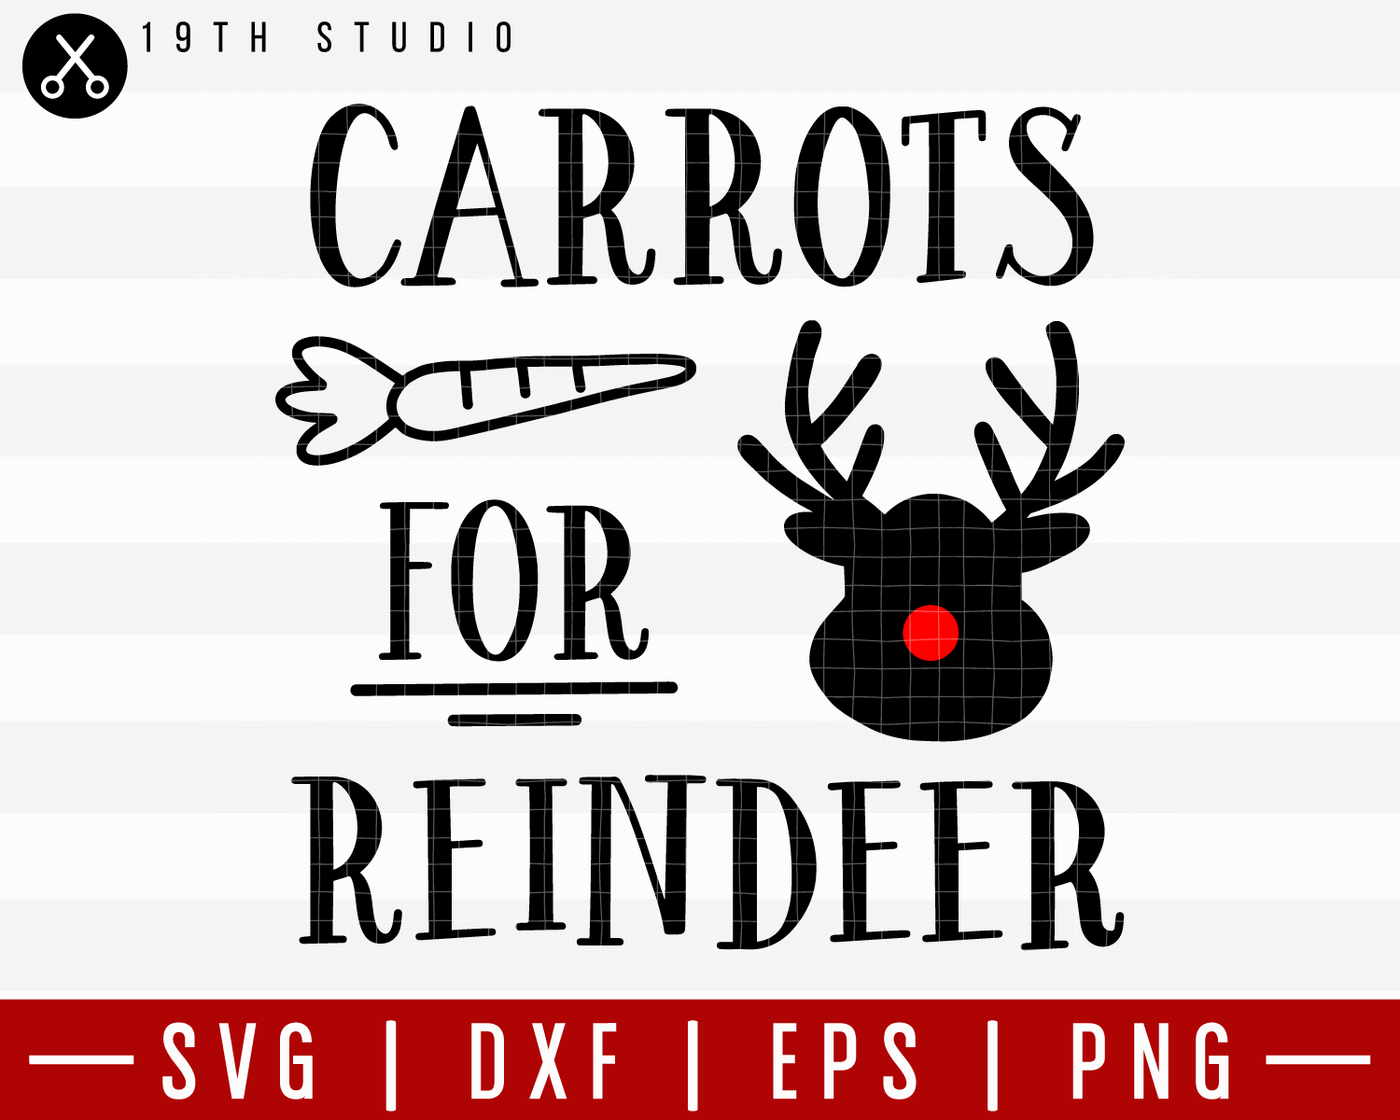 Carrots For Reindeer SVG | M21F10 Craft House SVG - SVG files for Cricut and Silhouette